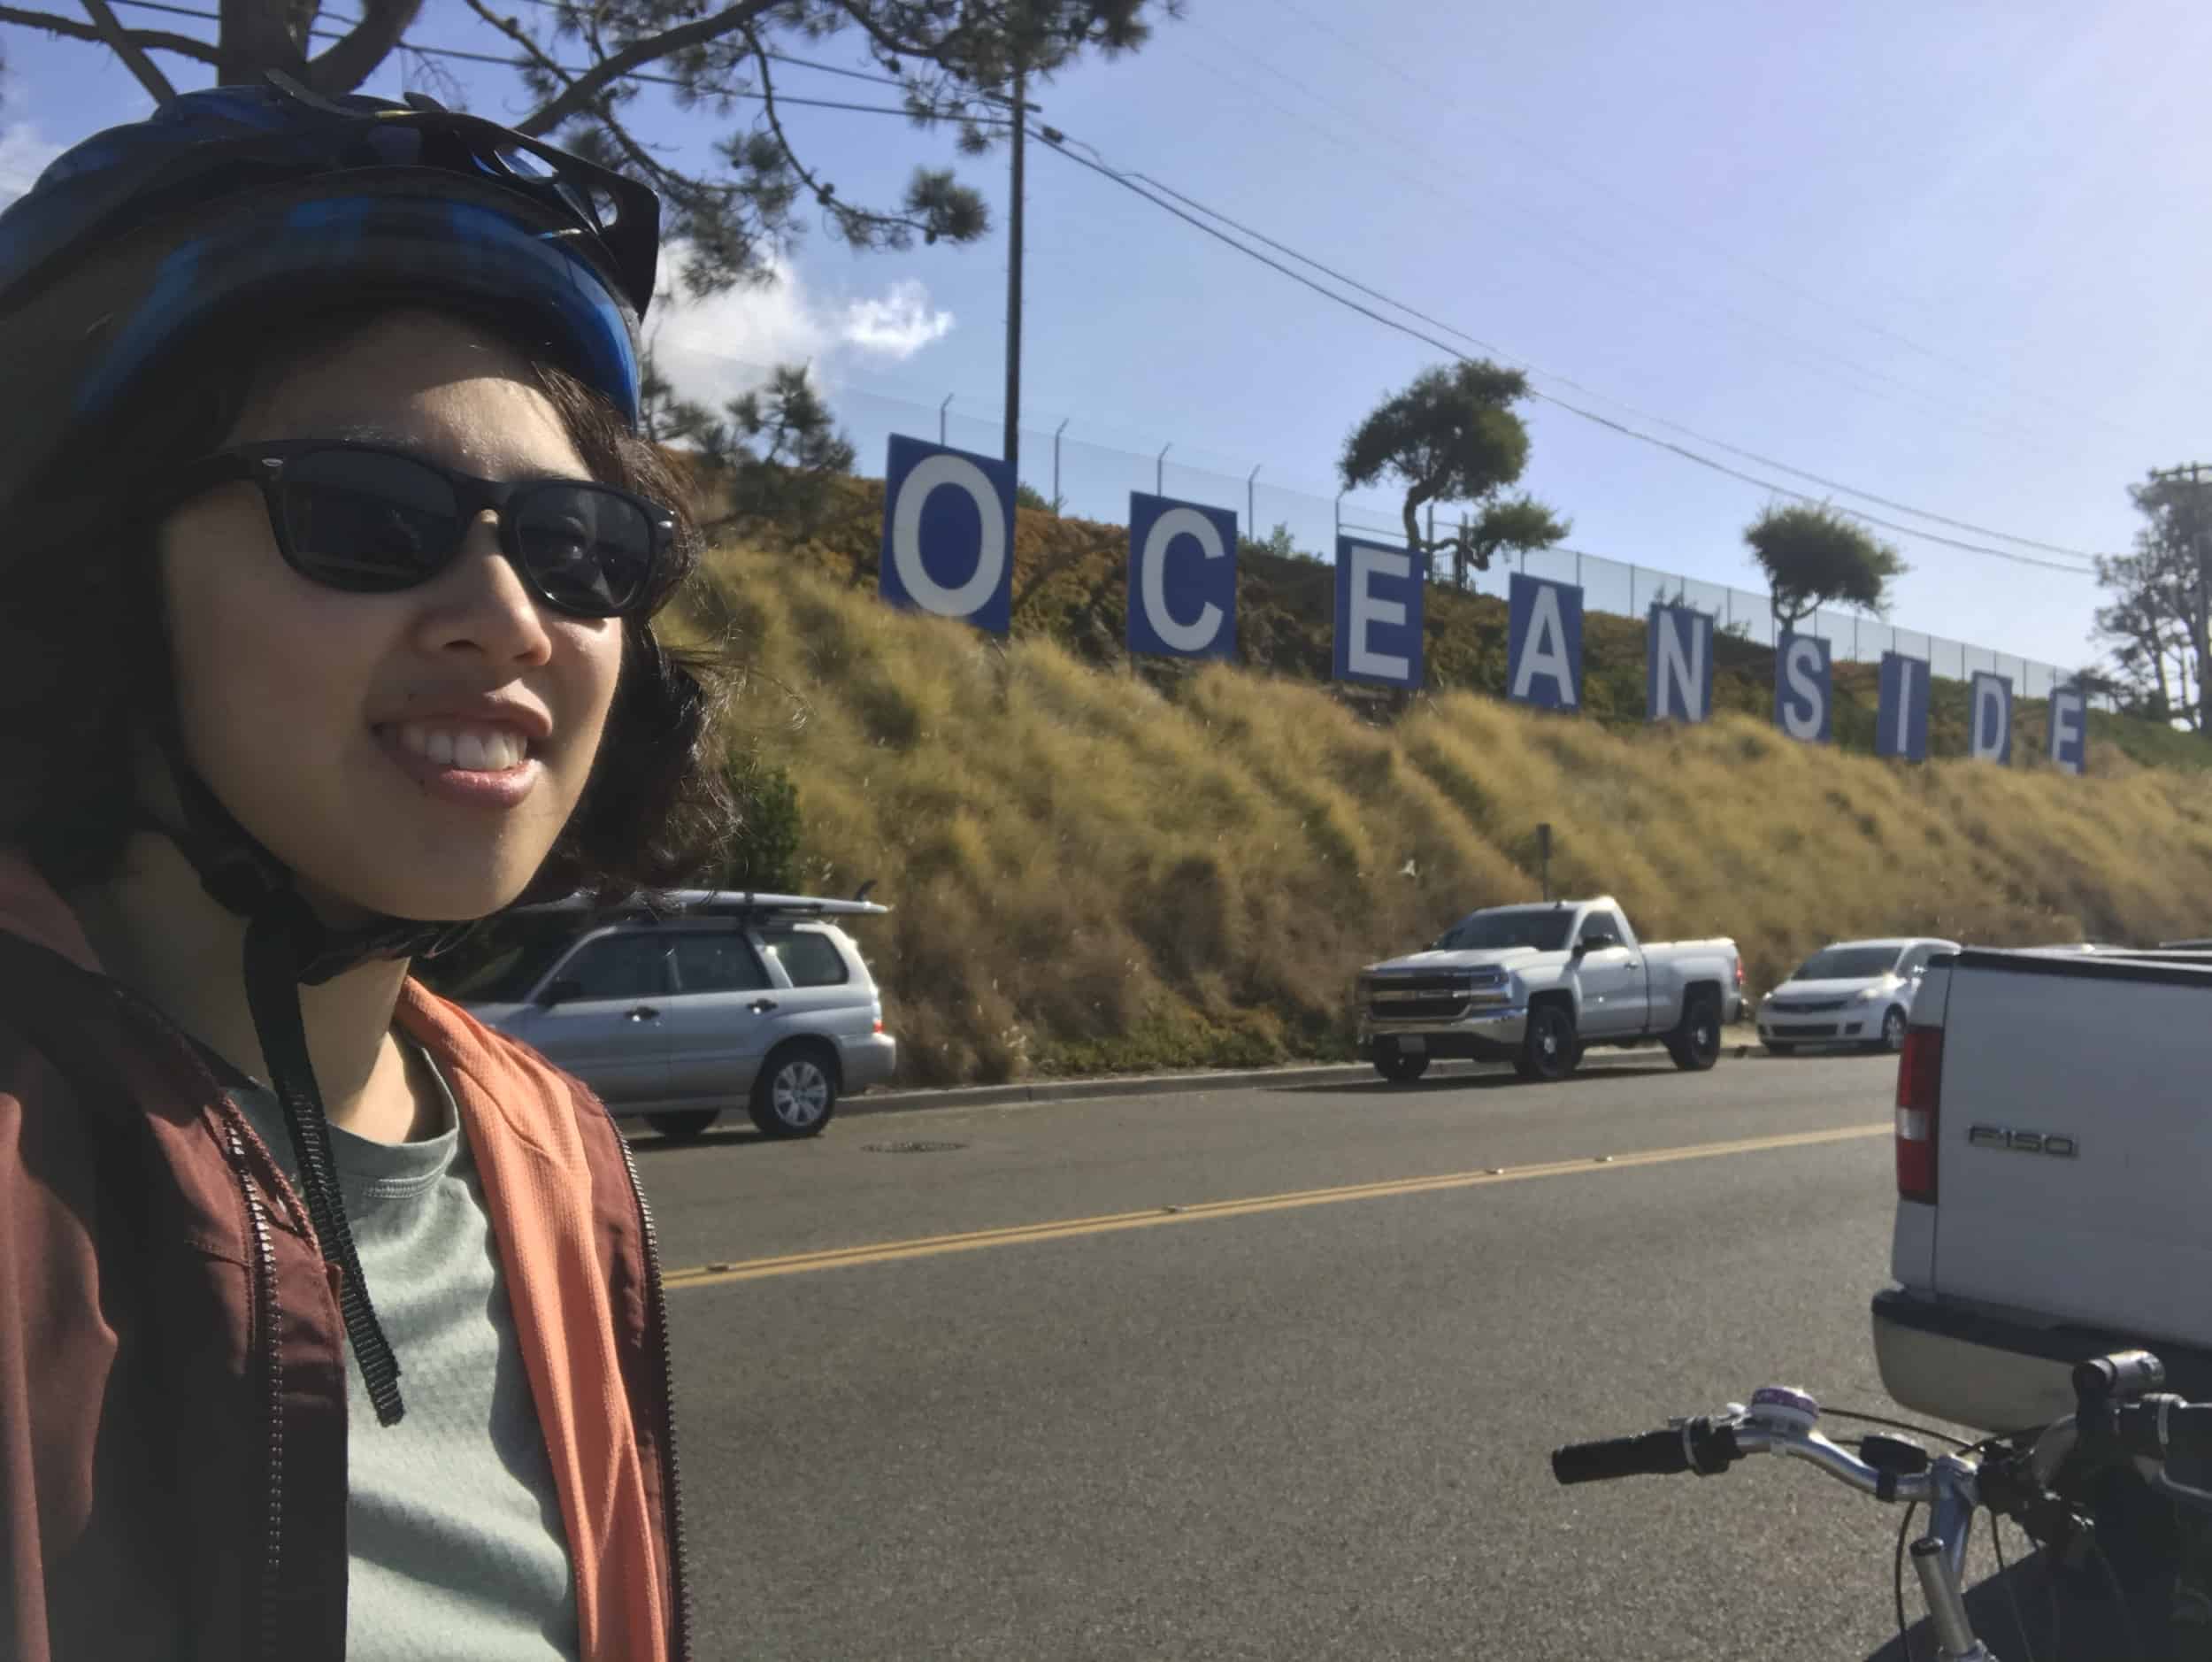 Meggie is wearing sunglasses, a maroon jacket, and a blue bike helmet. She is standing in front of a series of blue and white signs spelling "Oceanside" along the desert grassy hillside. Harbor Beach in Oceanside, California, United States of America